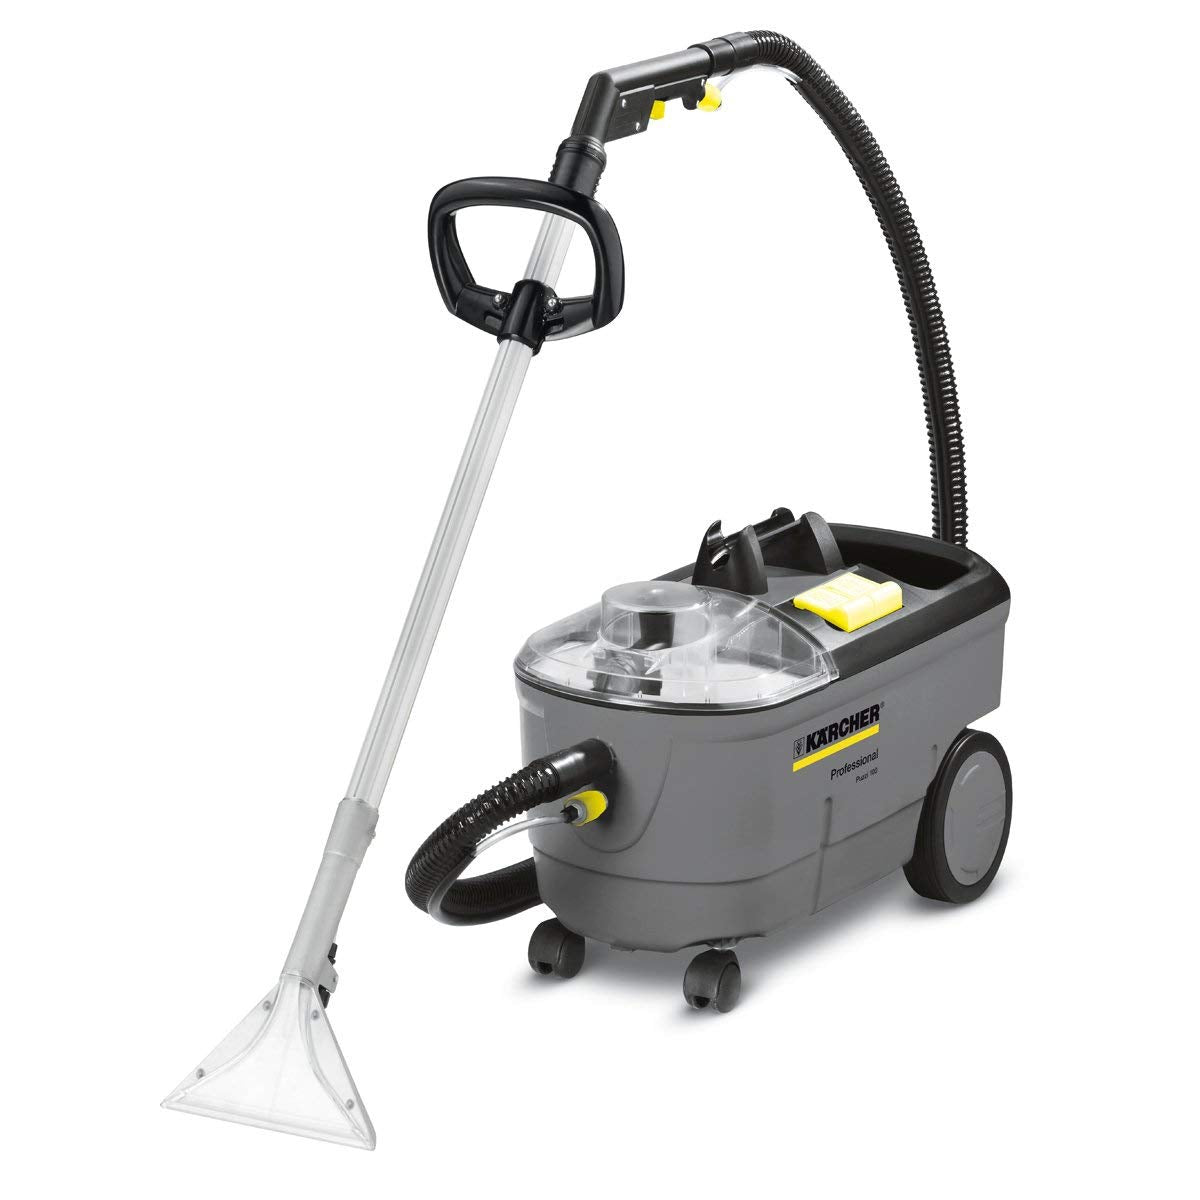 KARCHER Puzzi 10/1 & 8/1C - Spray Extraction Cleaners 